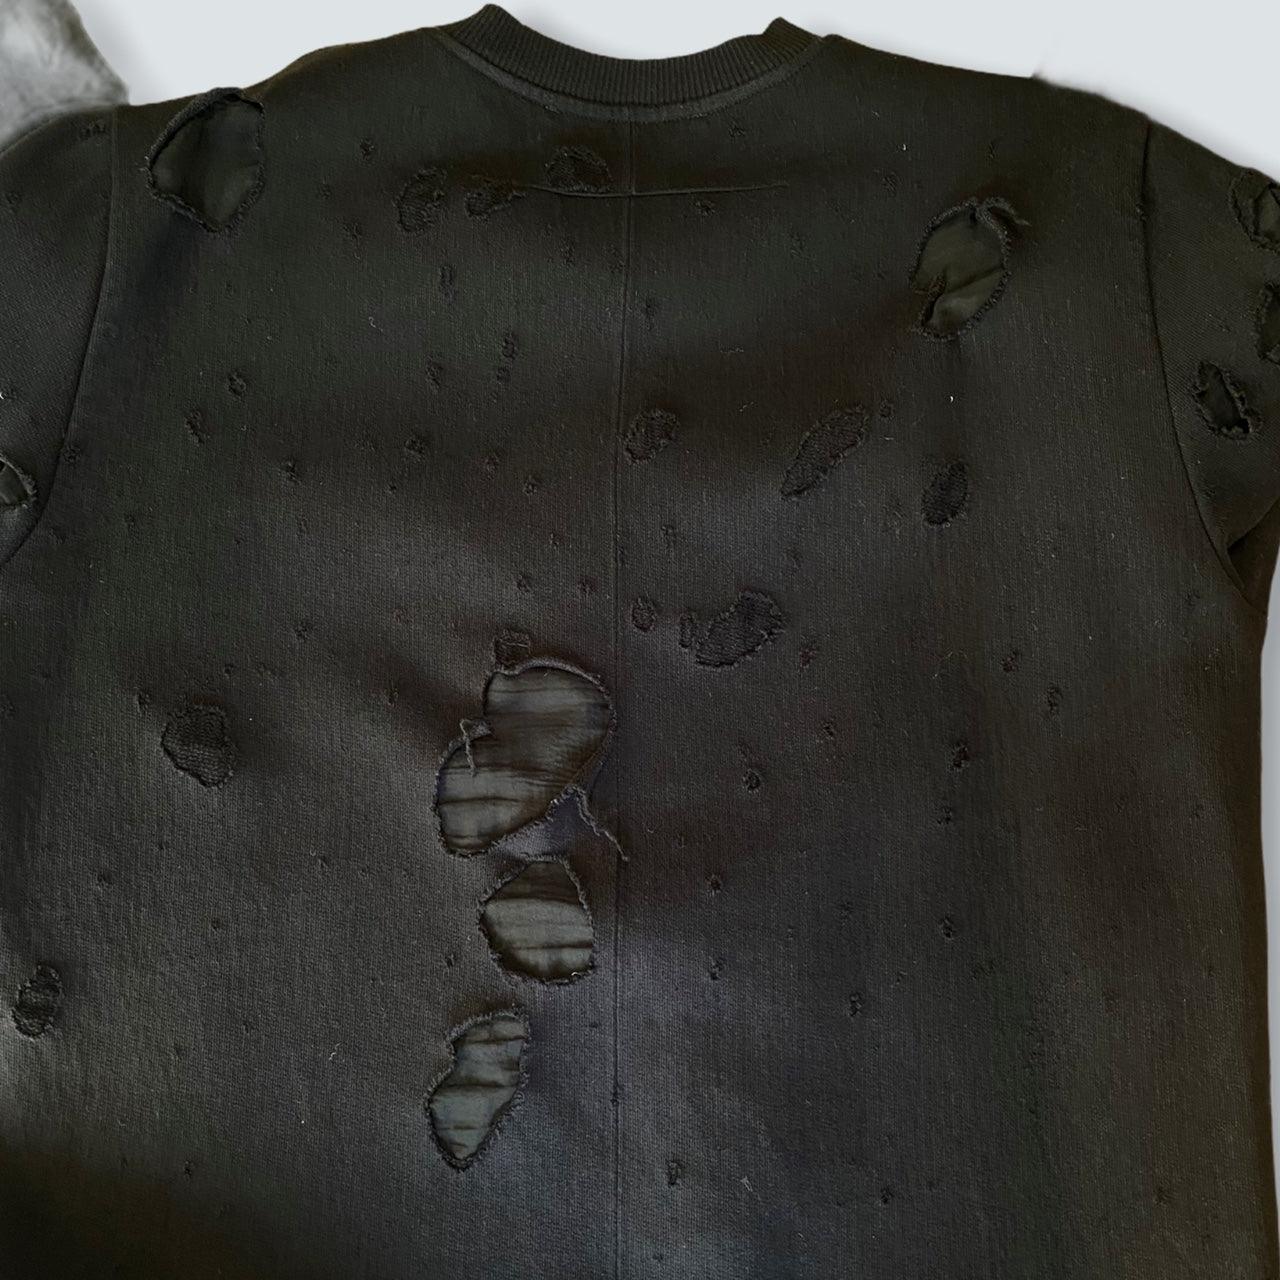 Givenchy Distressed crewneck (M) - Known Source